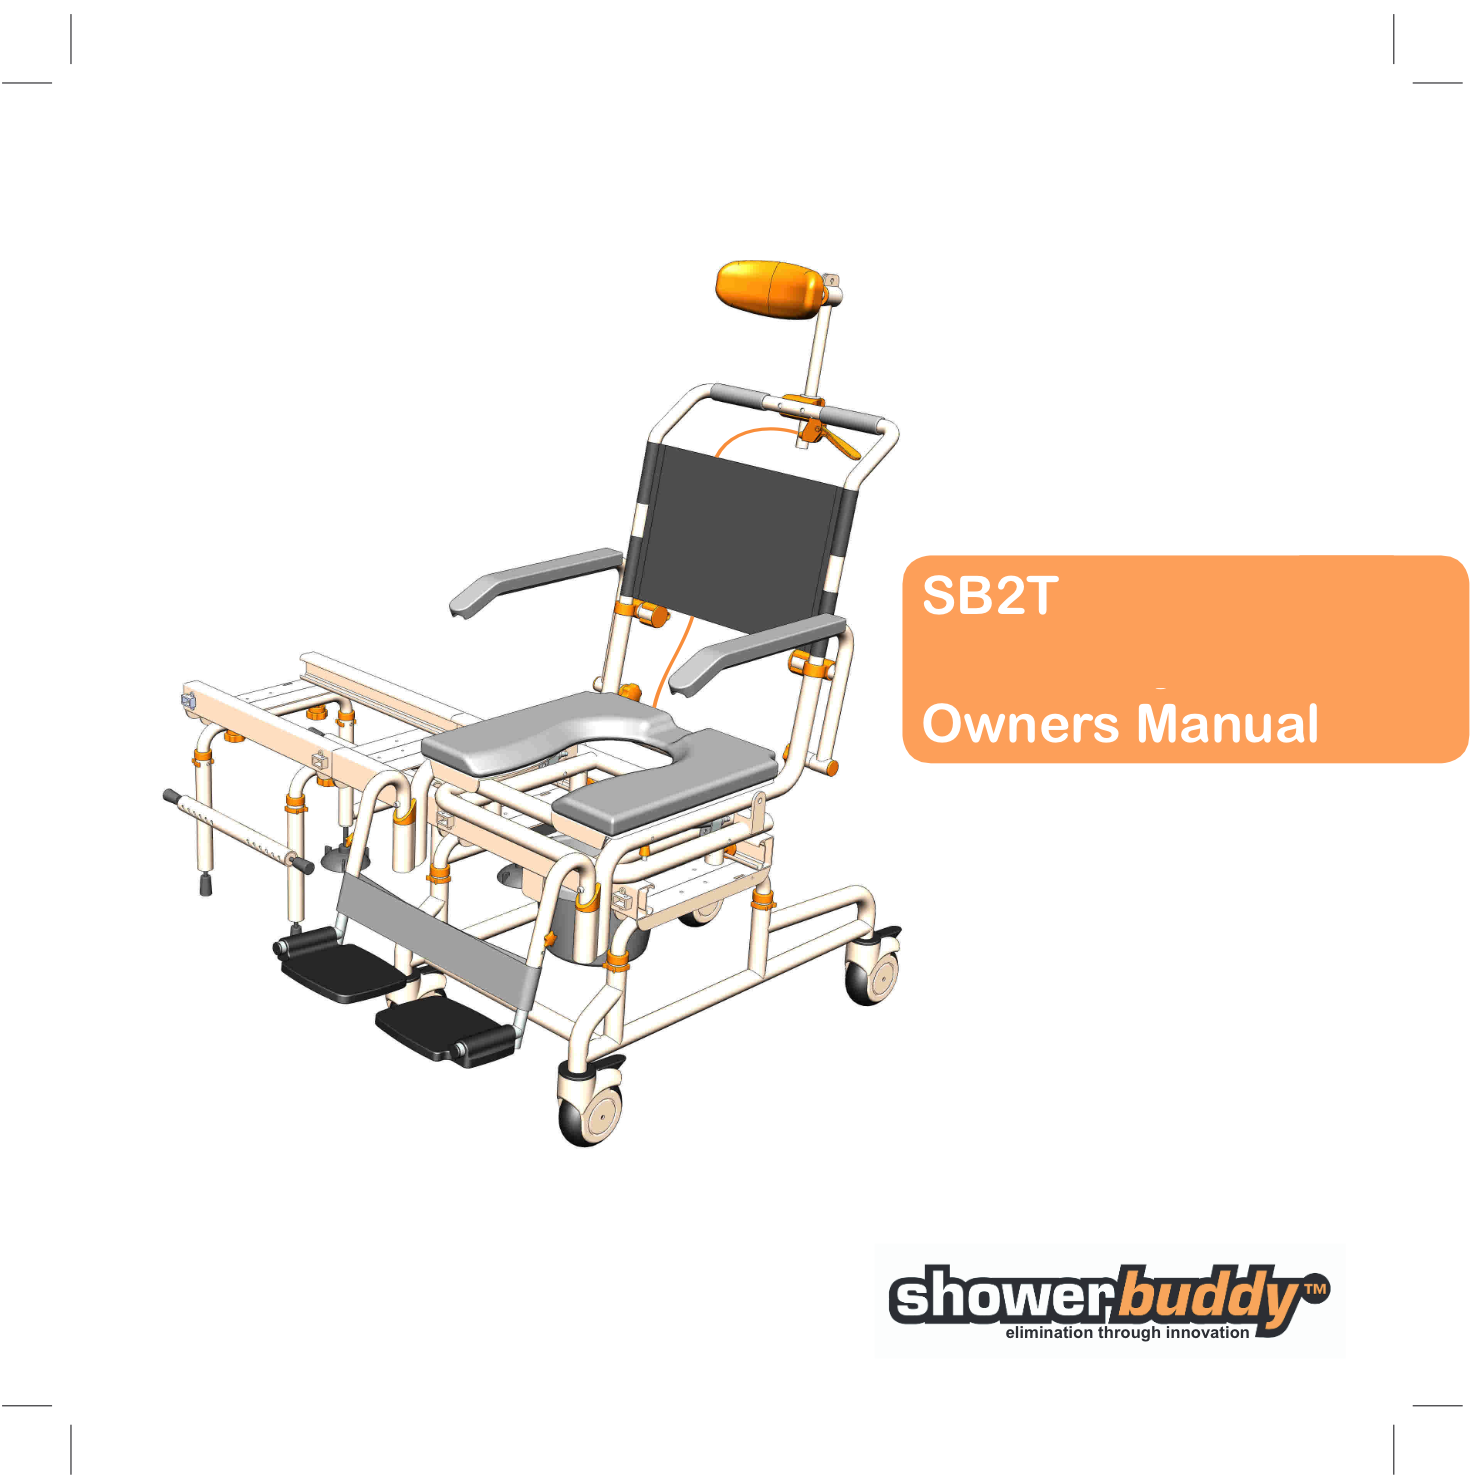 Shower buddy SB2T Owners Manual Download